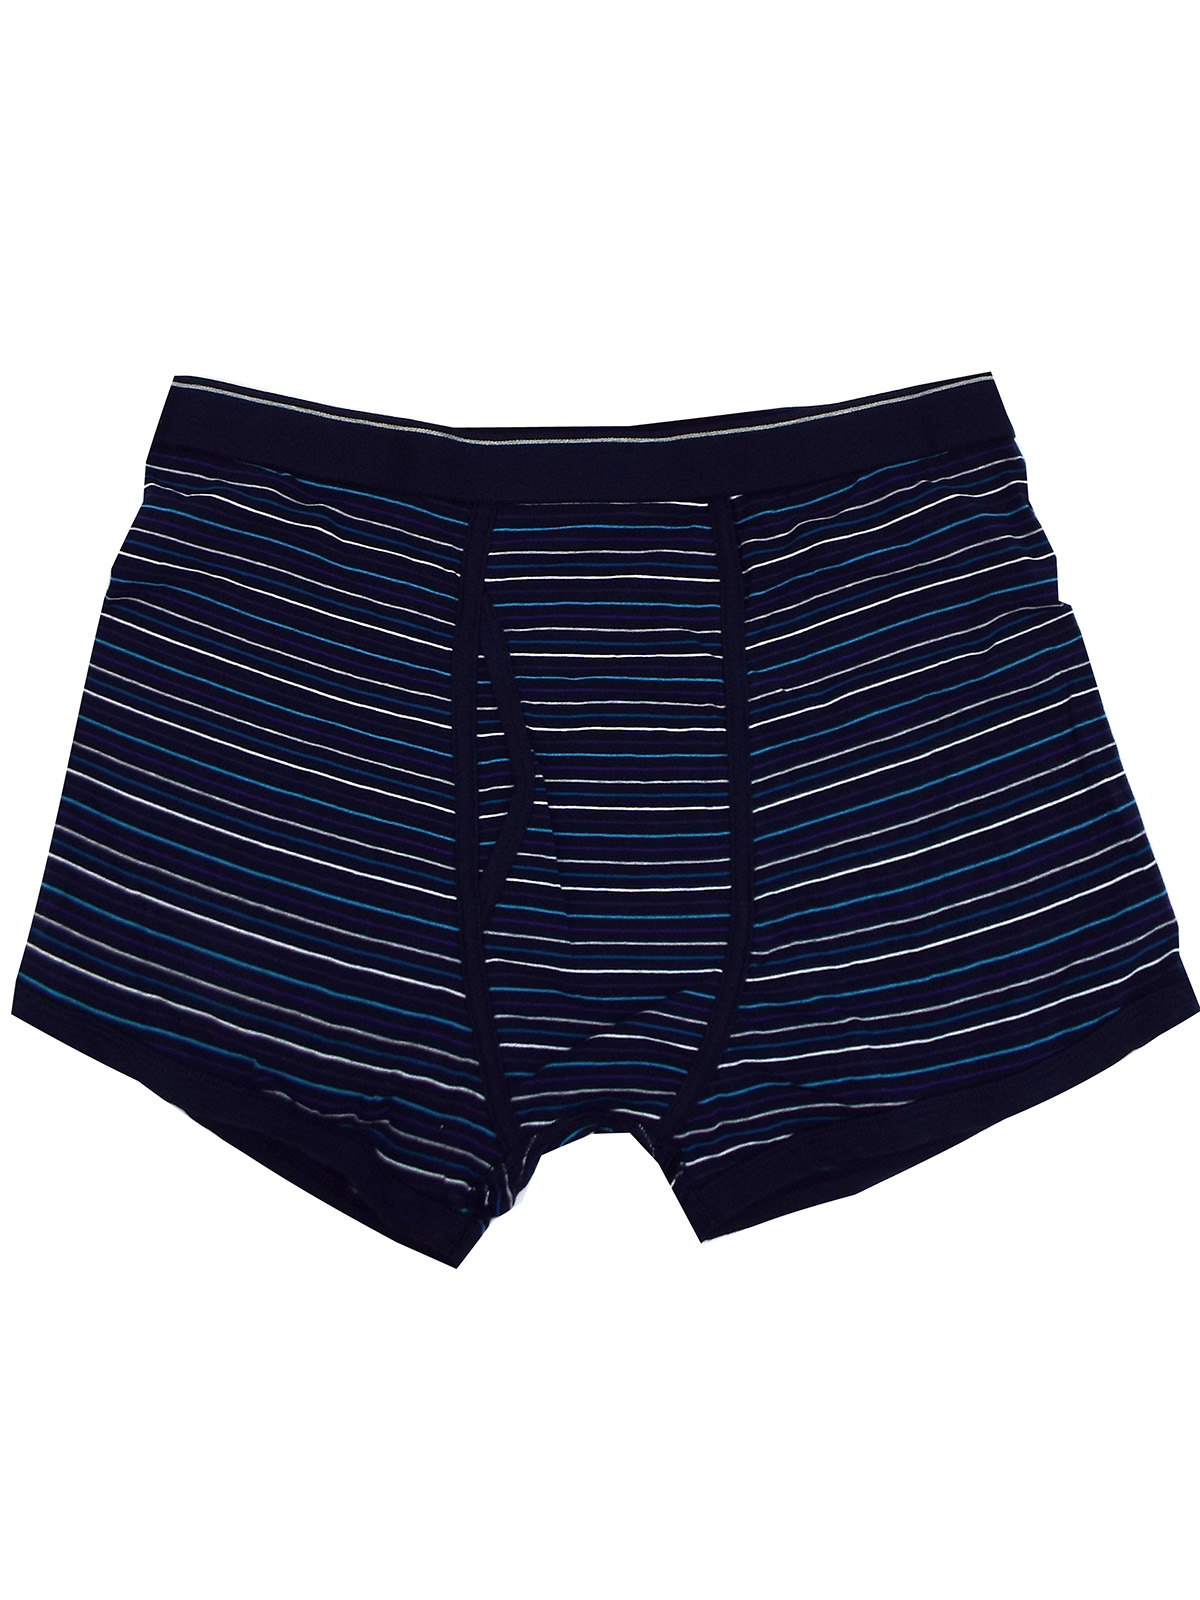 Marks and Spencer - - M&5 ASSORTED Mens Cotton Rich Striped Trunks ...